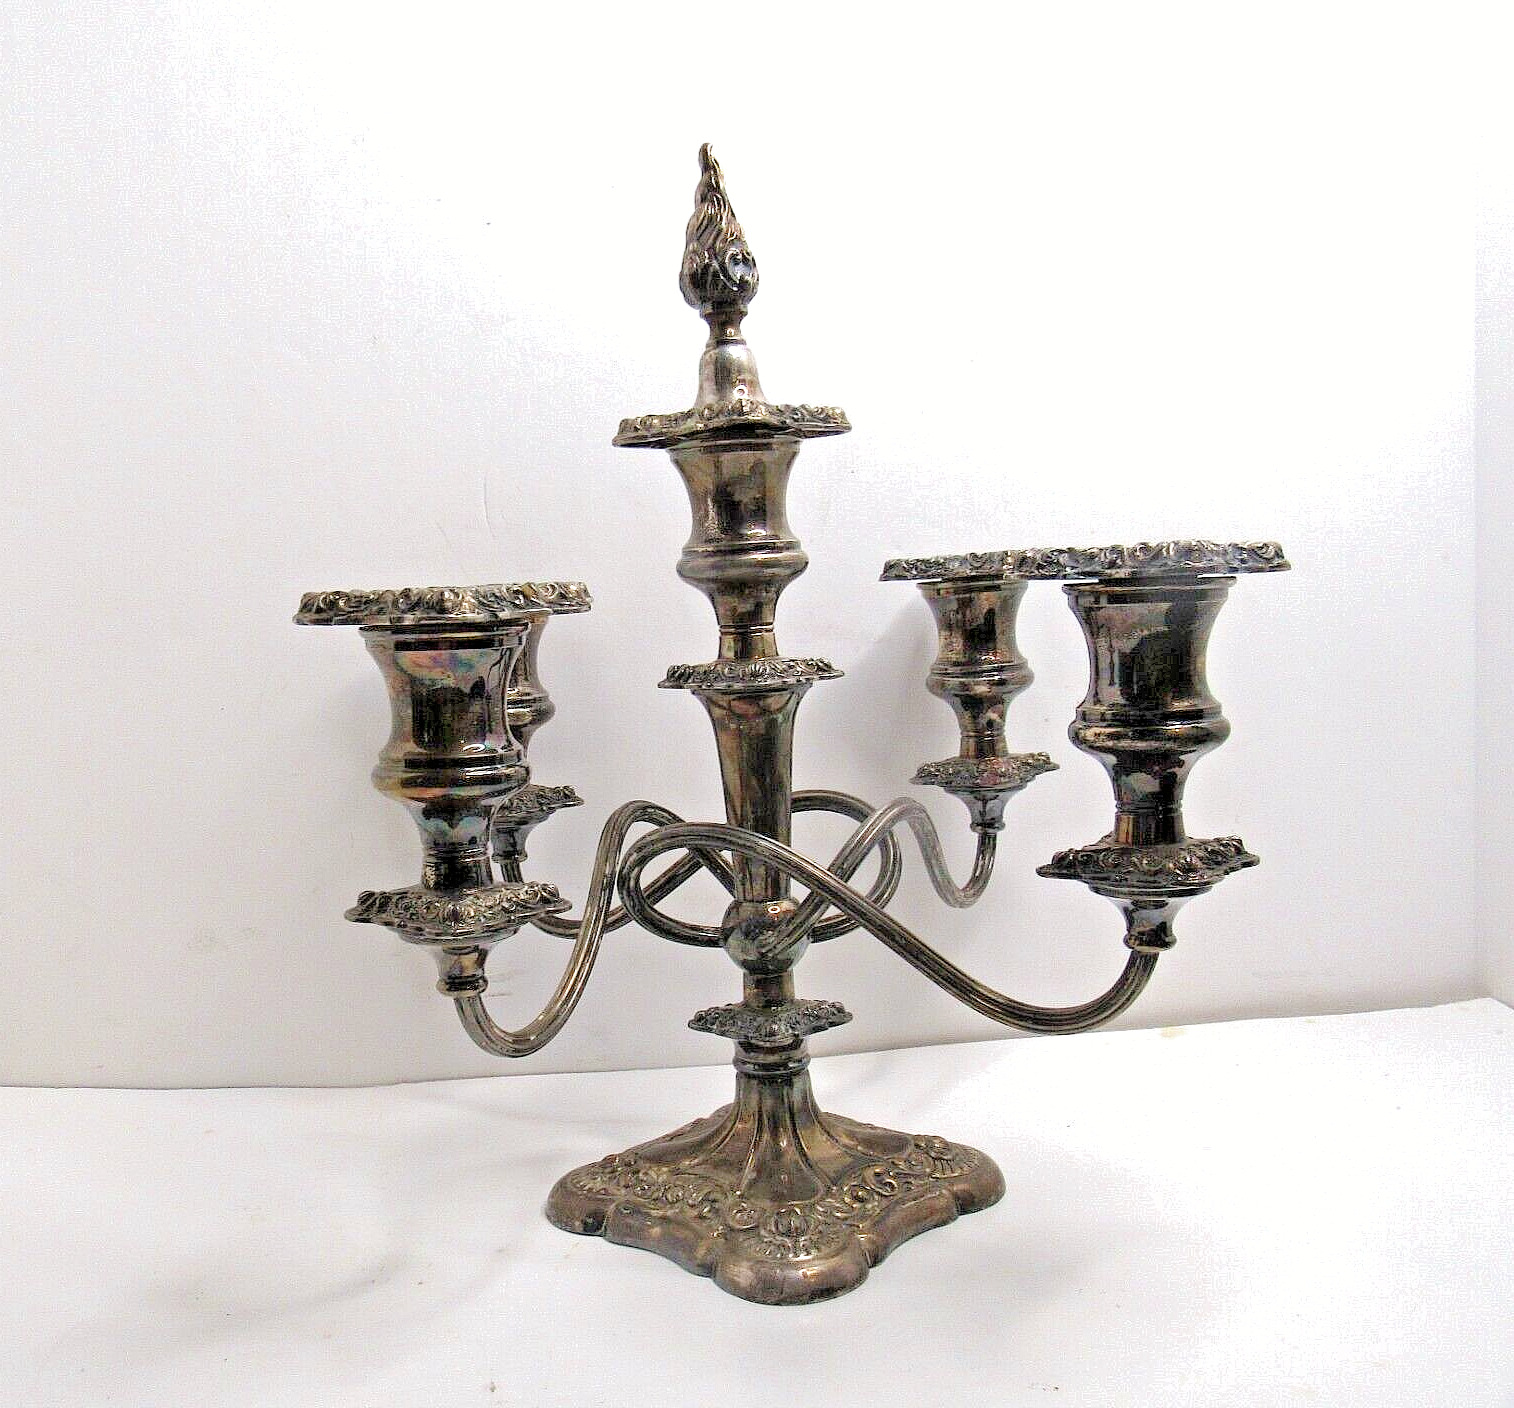 Antique E.G. Webster & Son Candelabra 505 Five Arm Baroque Twisted Silver Plated